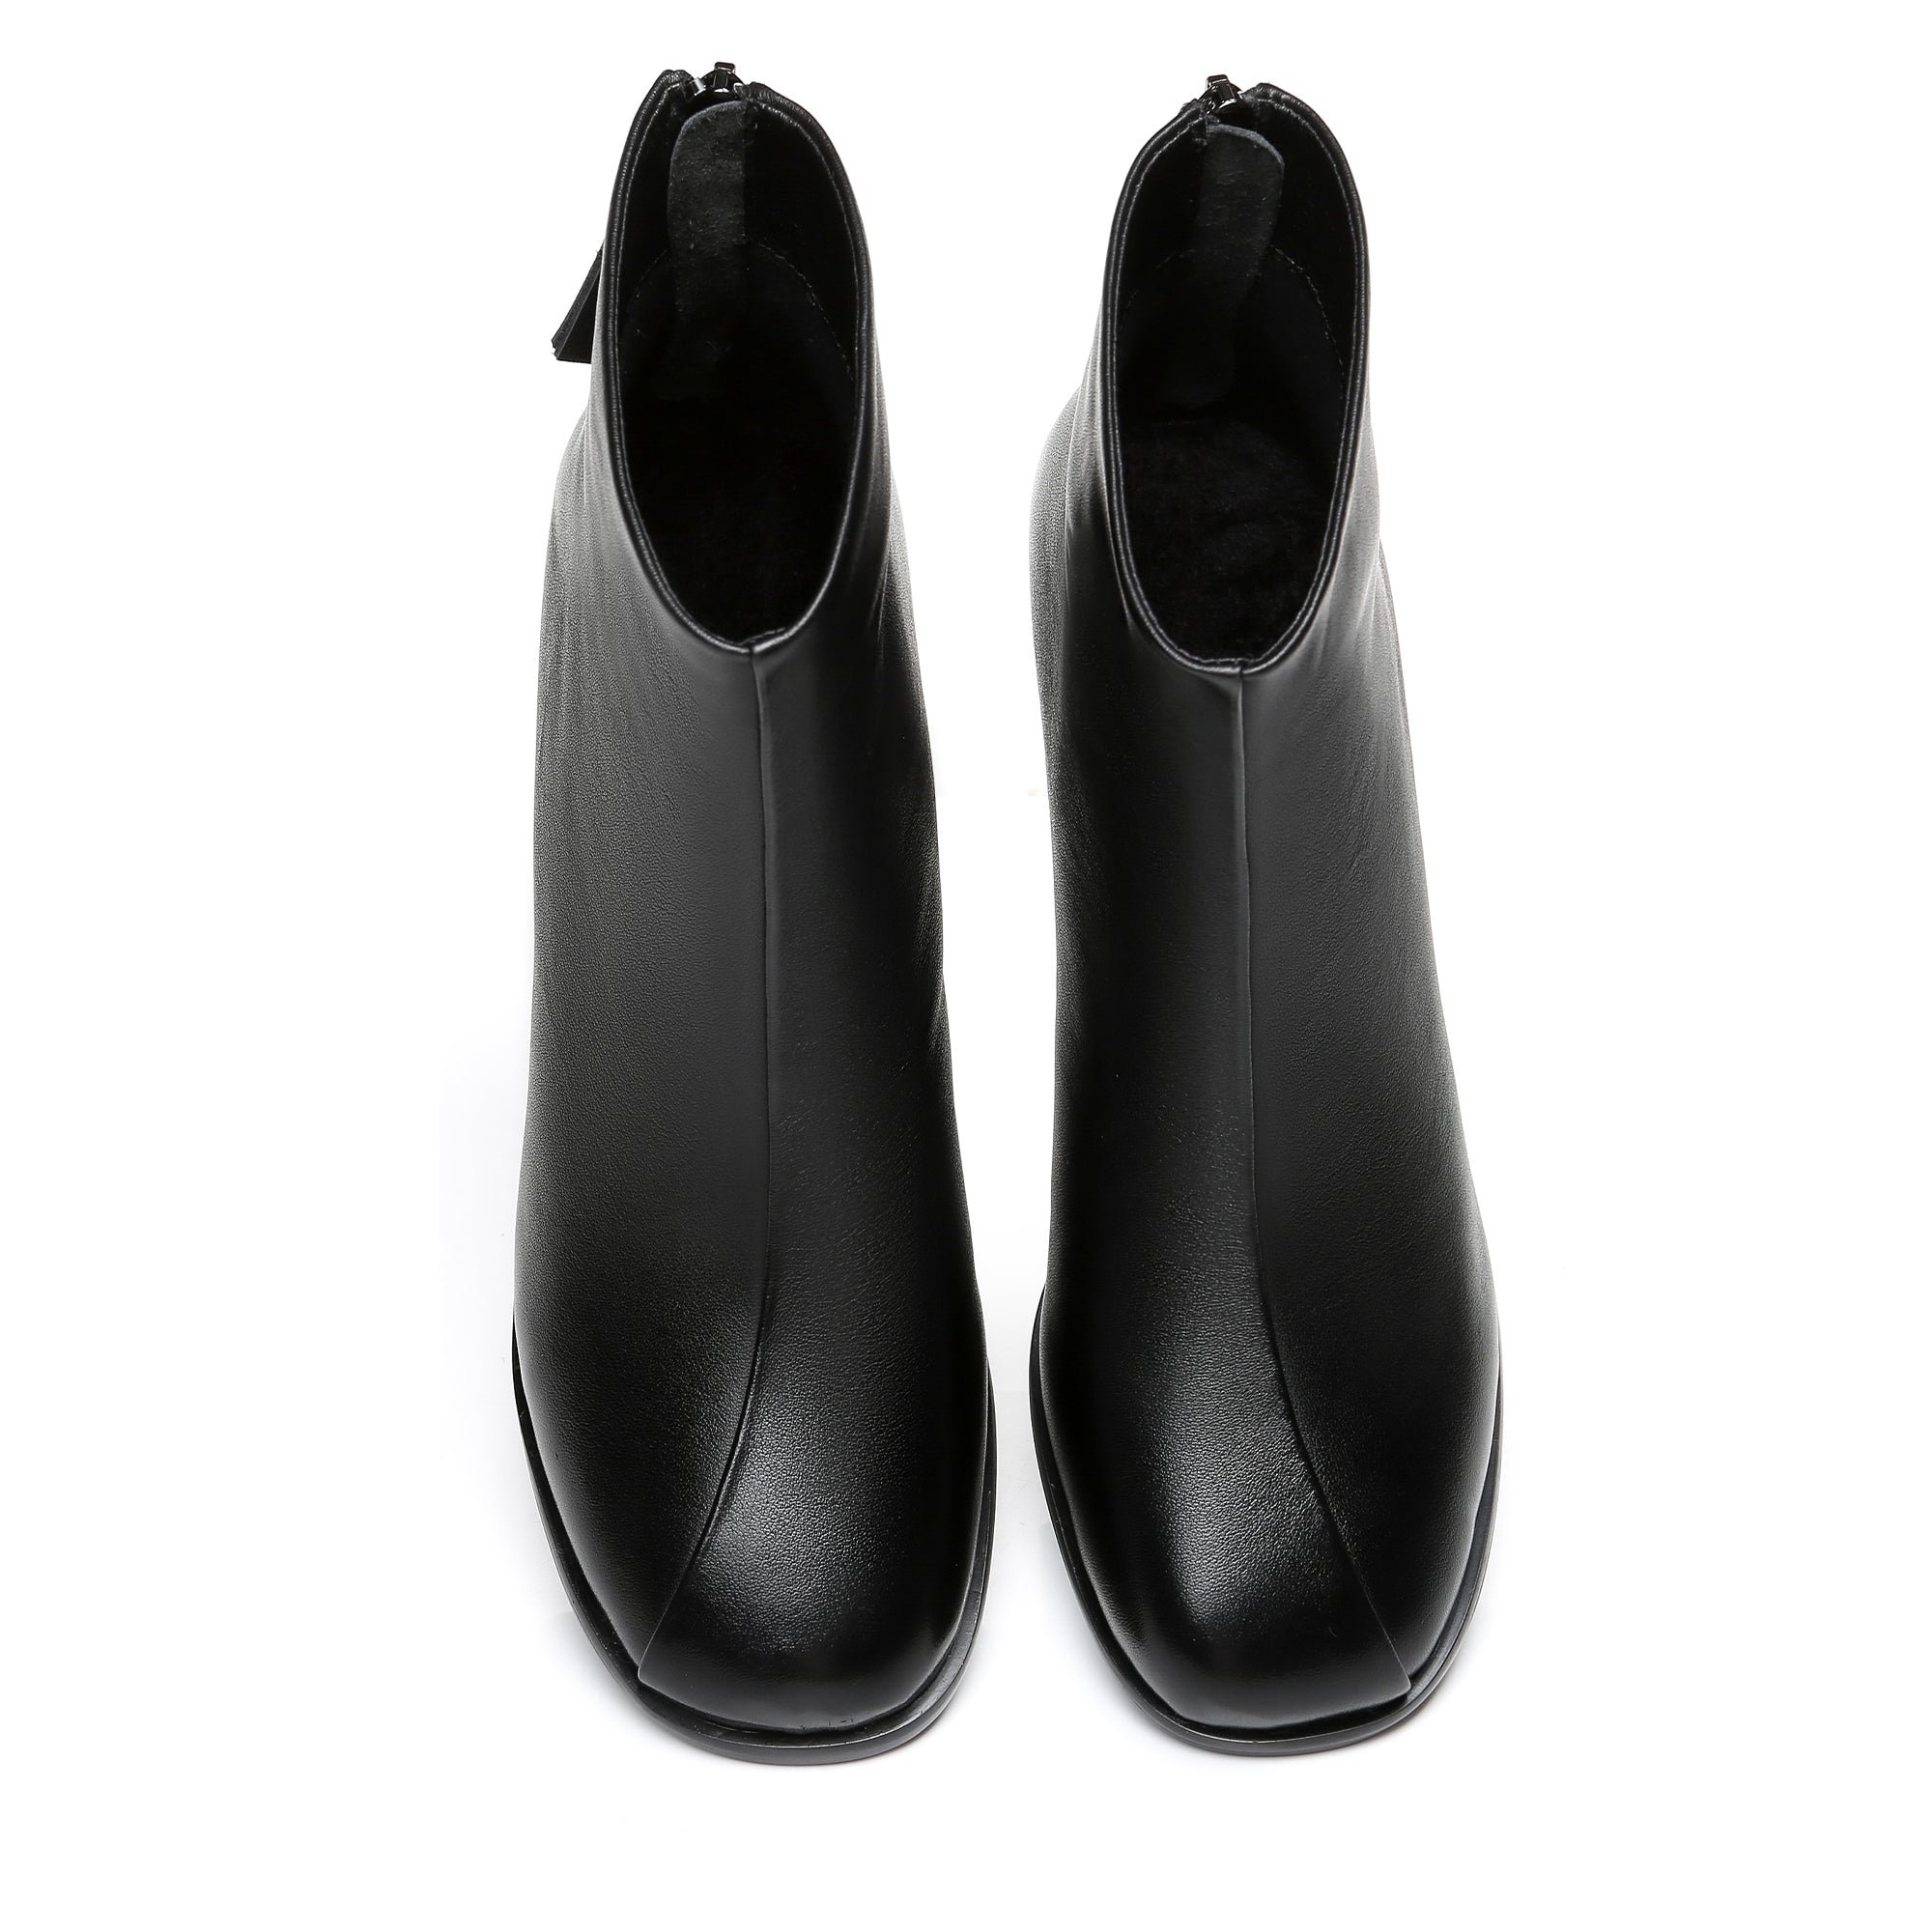 Roma Black Leather Ankle boots